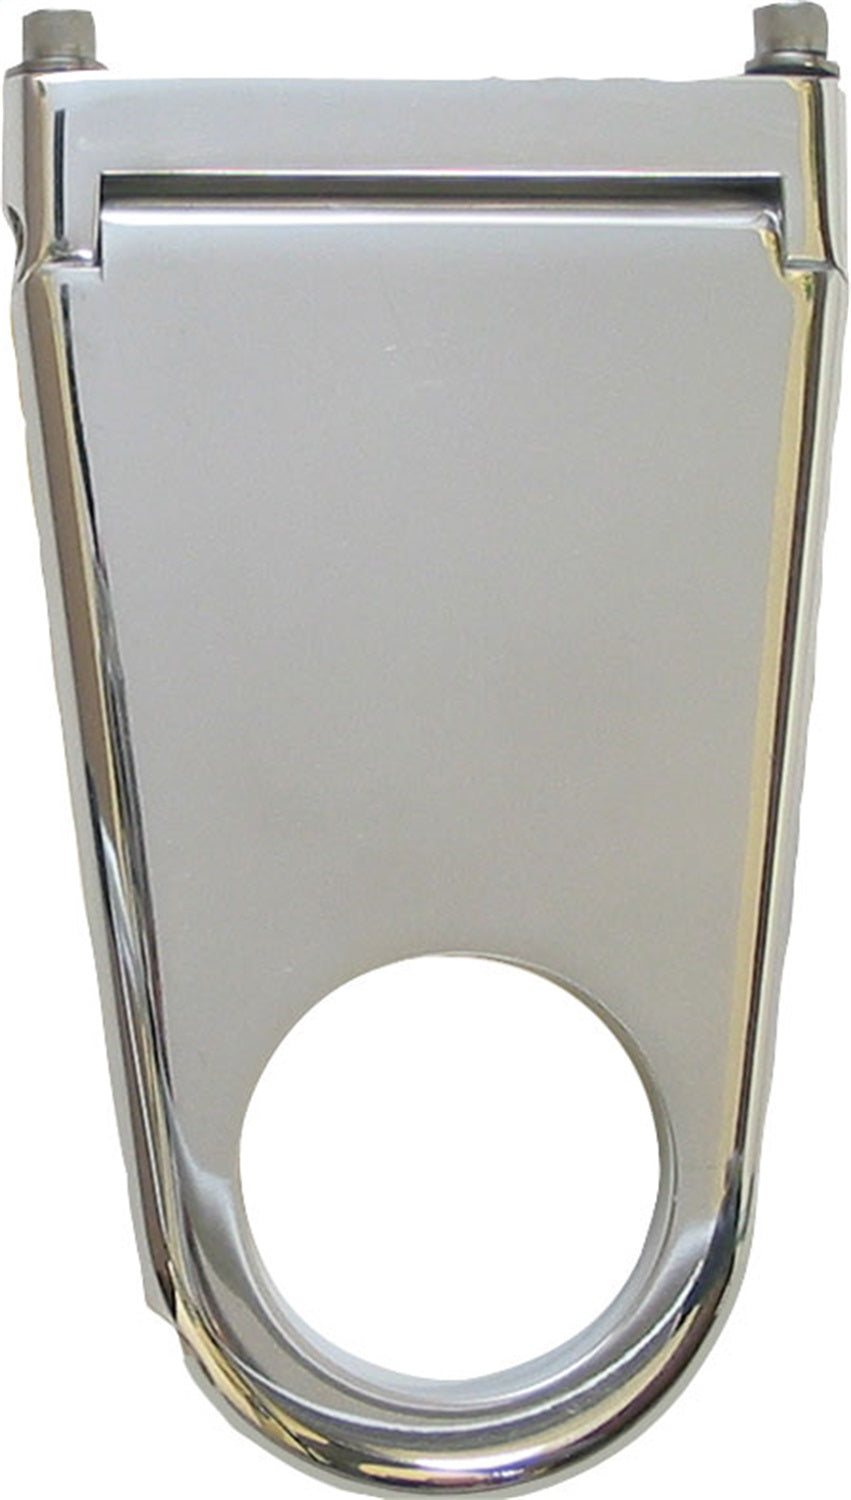 Borgeson Column Drop Blank Style 2-1/4in. Column X 5in. Drop Polished Aluminum 911225